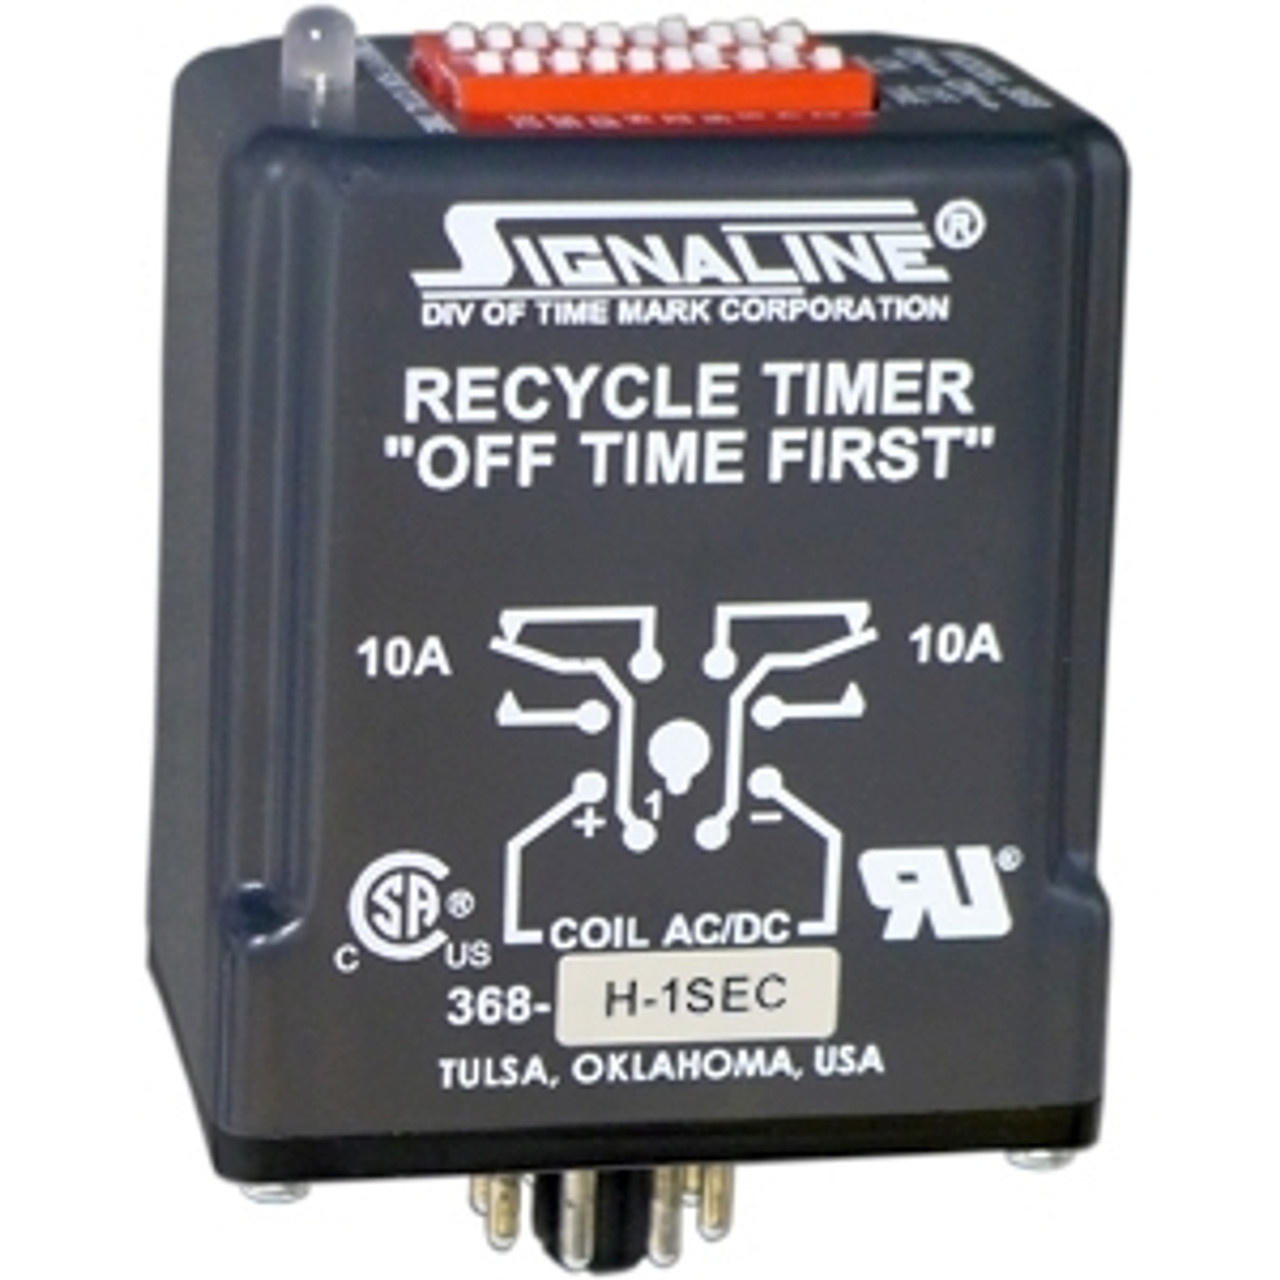 TimeMark 368-L-1MIN/SG Repeat Cycle - Recycle